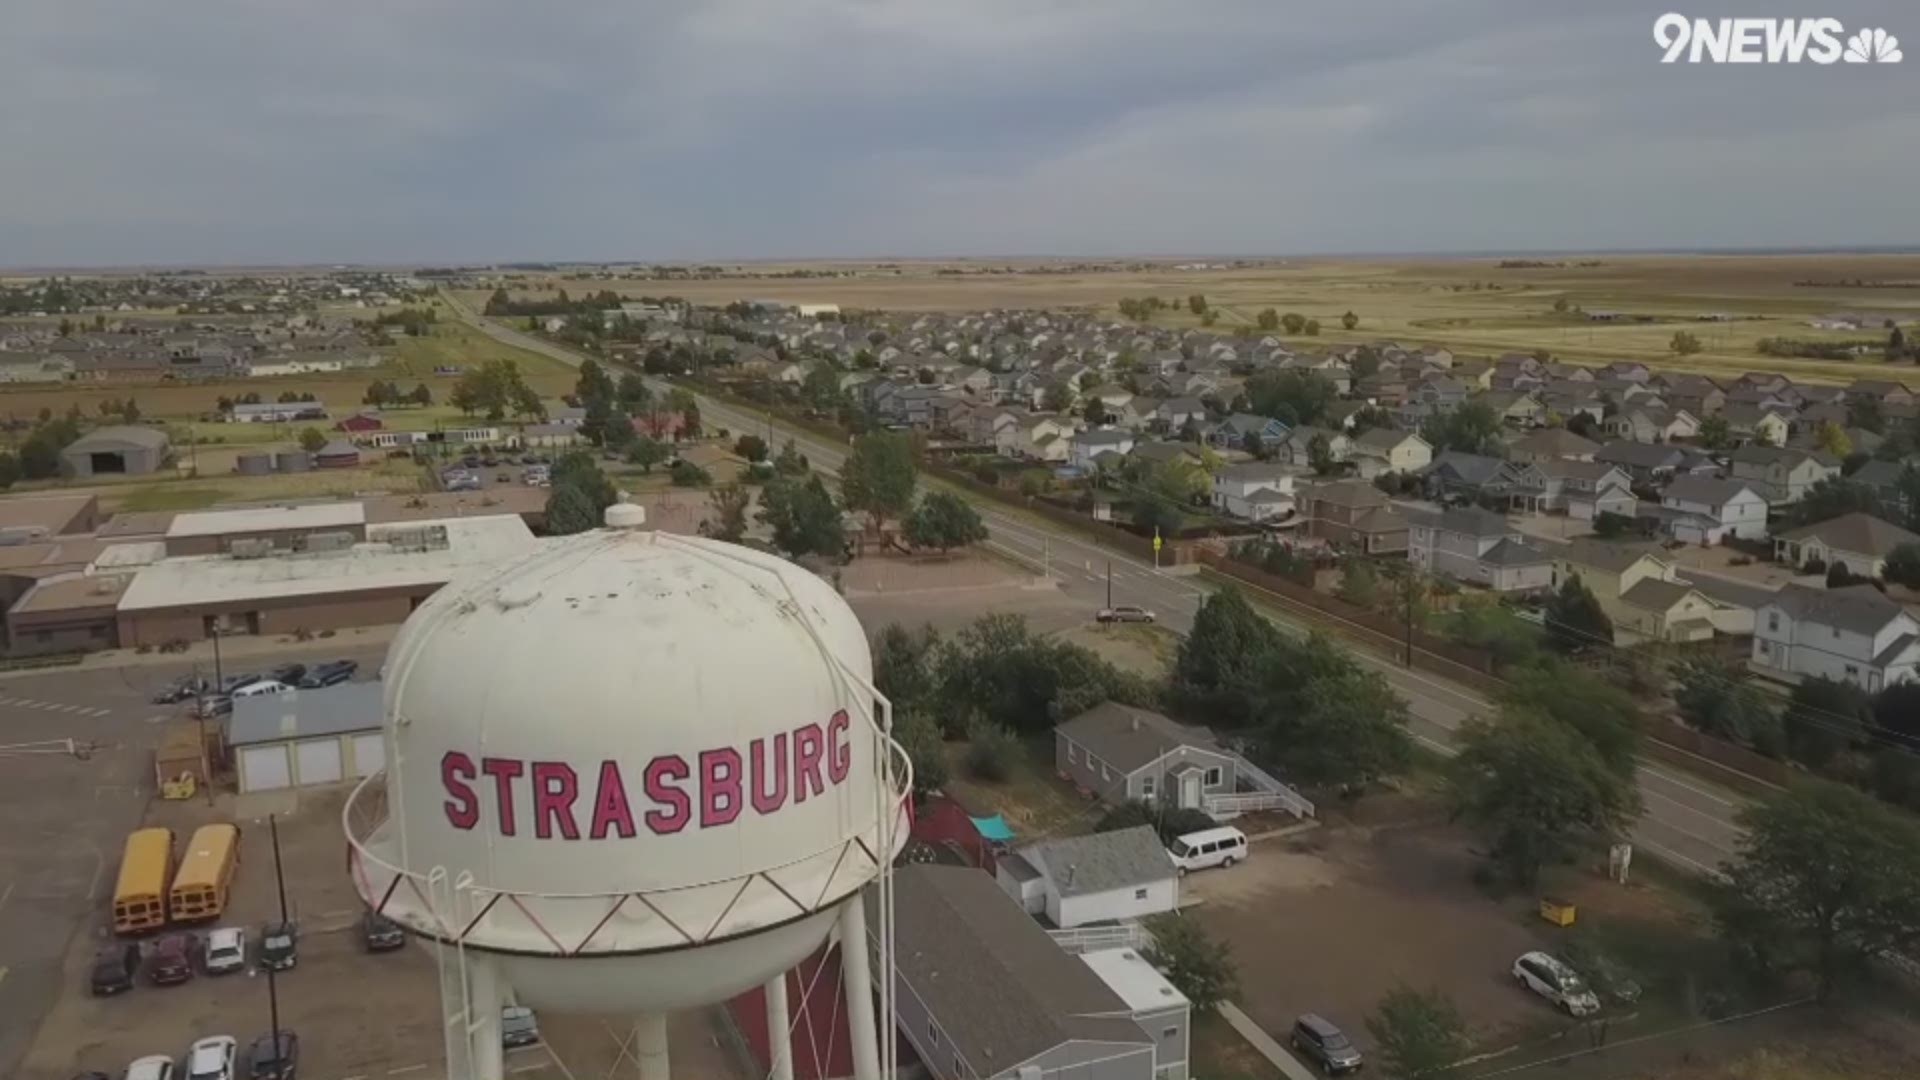 Strasburg, east of Denver's airport, isn't a town or a city. It's a place designated by the U.S. Census, with a population that's nearly doubled in the last 20 years